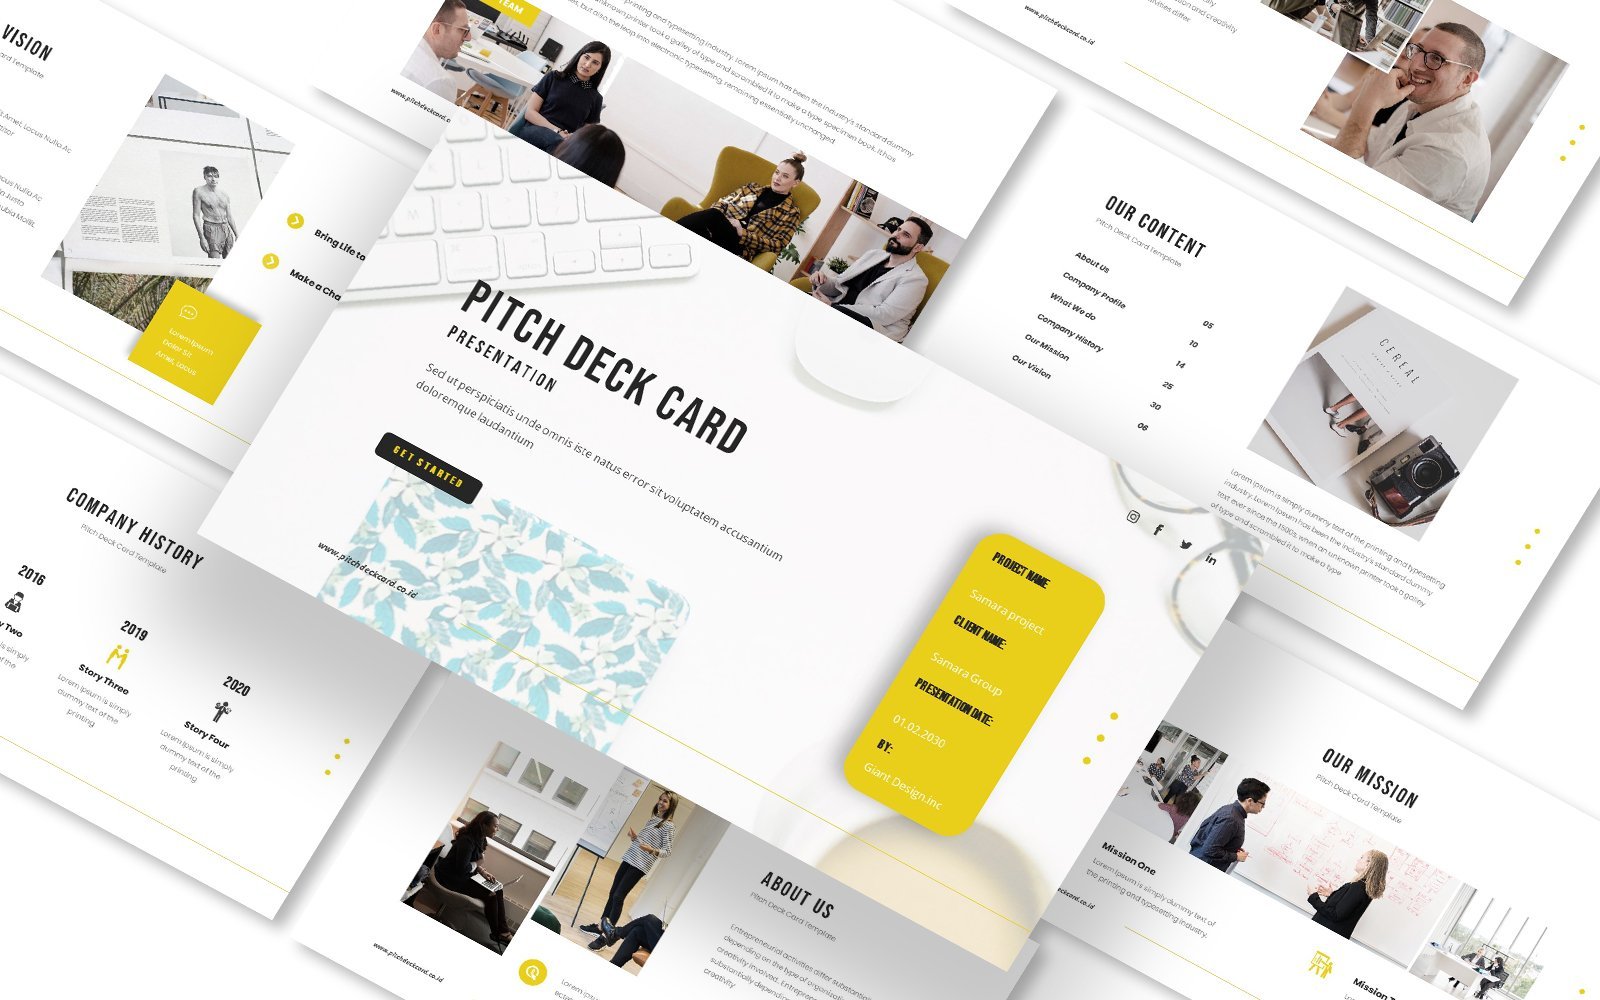 Pitch Deck Card Powerpoint Template